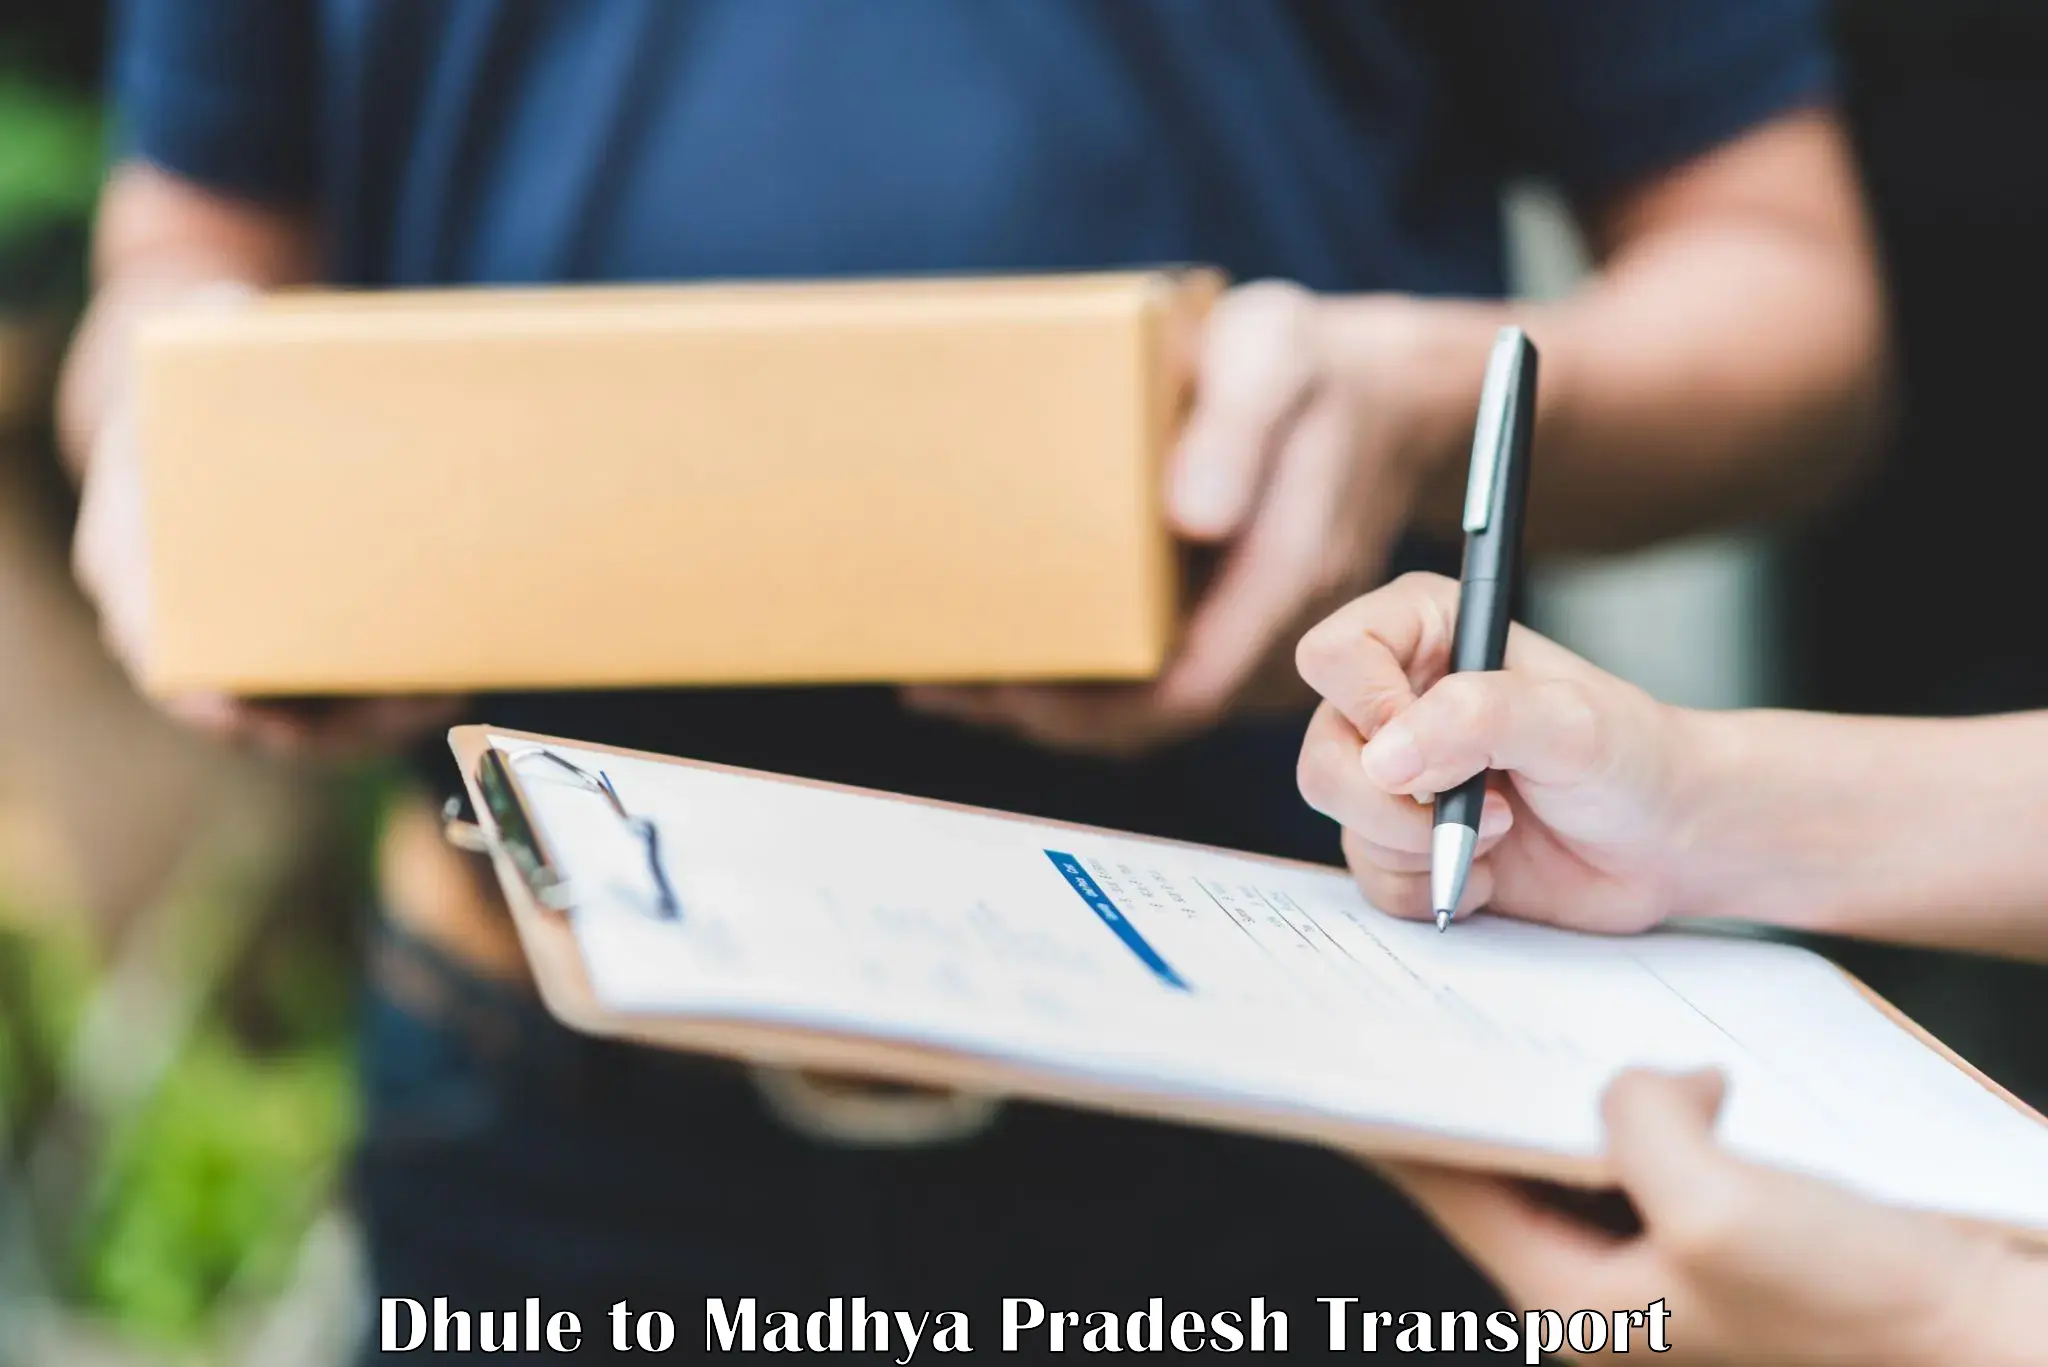 Commercial transport service Dhule to Dhamnod